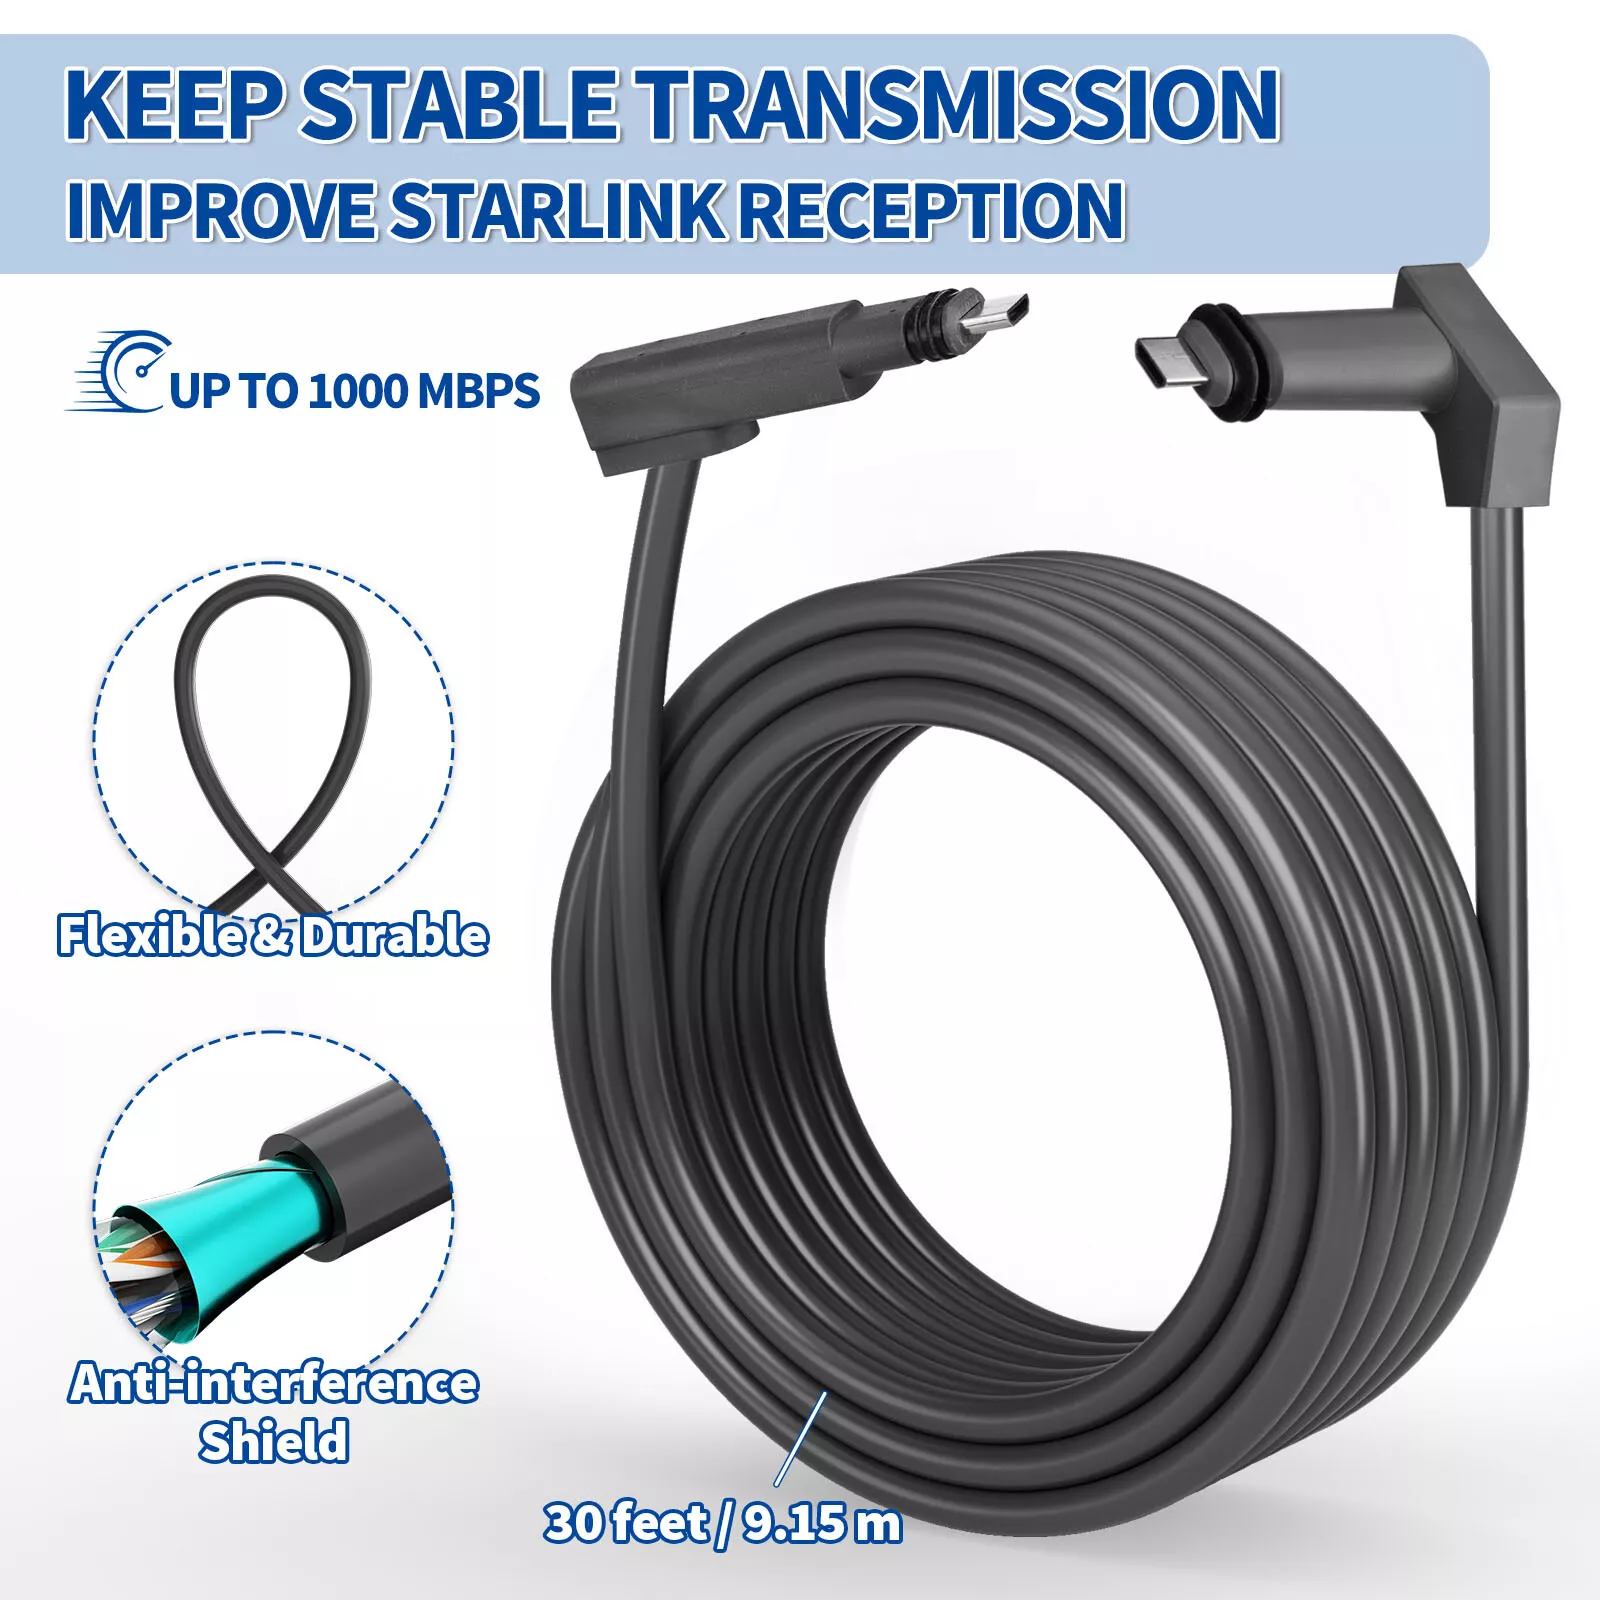 Starlink Standard Satellite V2 30 Ft Replacement Cable - with Cable Feed Through Bushings & Wire Clips - Starlink Extension Cables Accessories